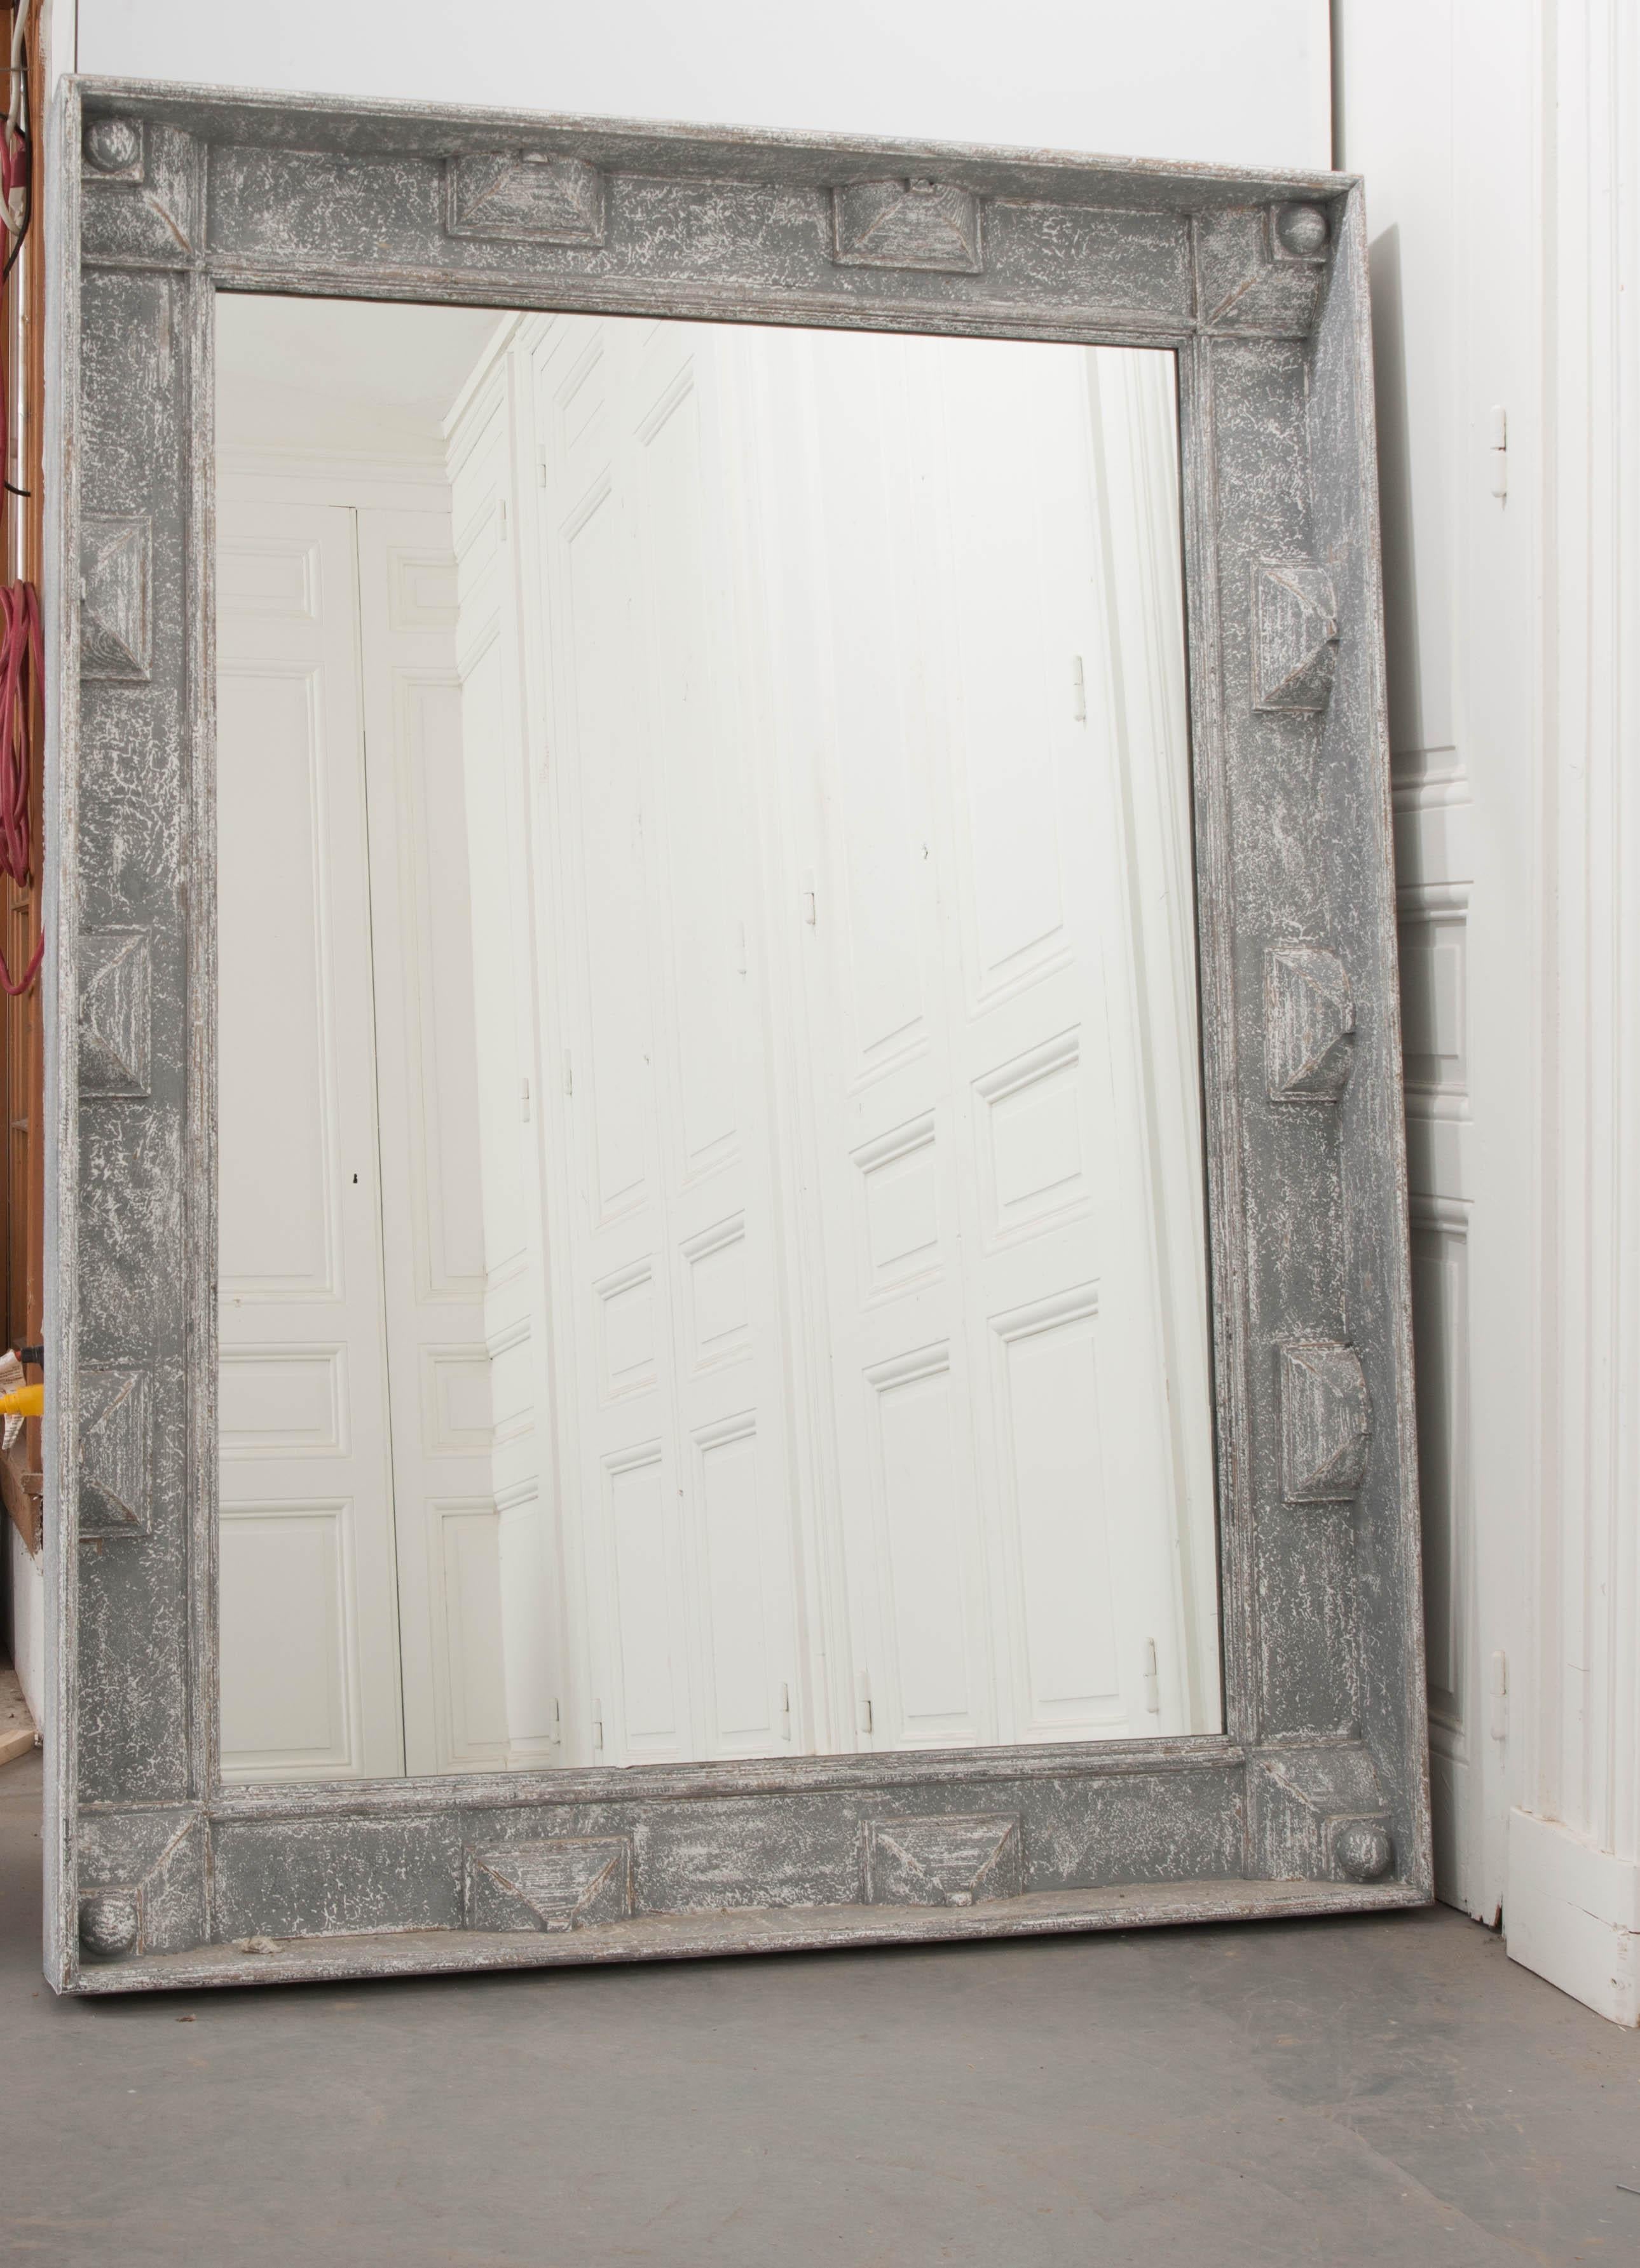 A grand pair of new, reproduction mirrors that have been painted a fabulous blue-gray and have frames crafted with excellent geometric carvings. Each large mirror contains new glass that is encased by its interesting, deep frame. The pair can be